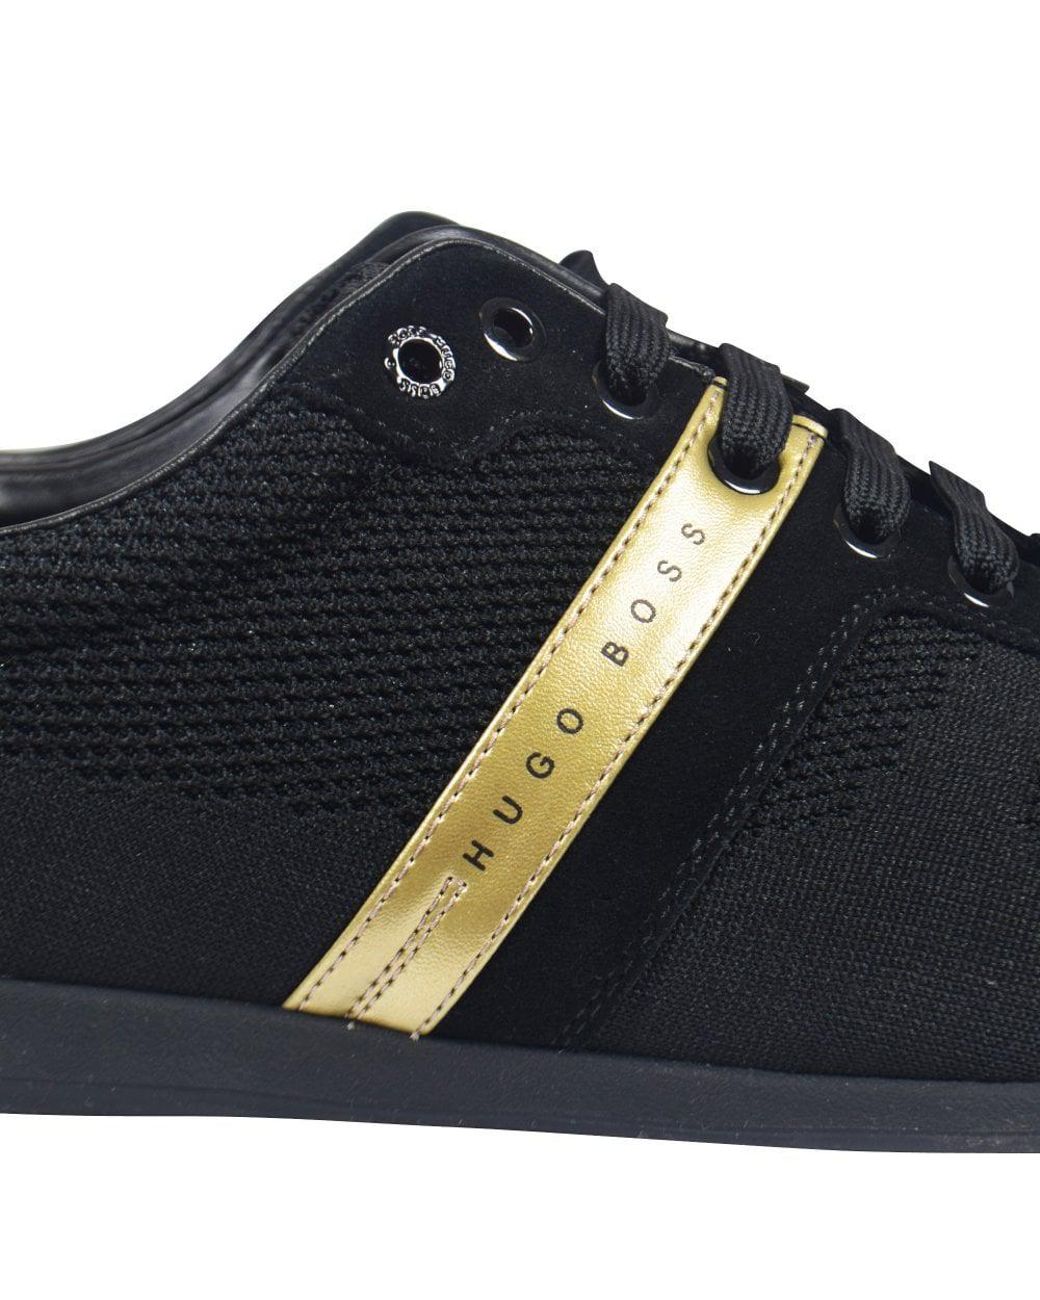 BOSS by HUGO BOSS Suede Black/gold Maze Lowp Trainers for Men | Lyst